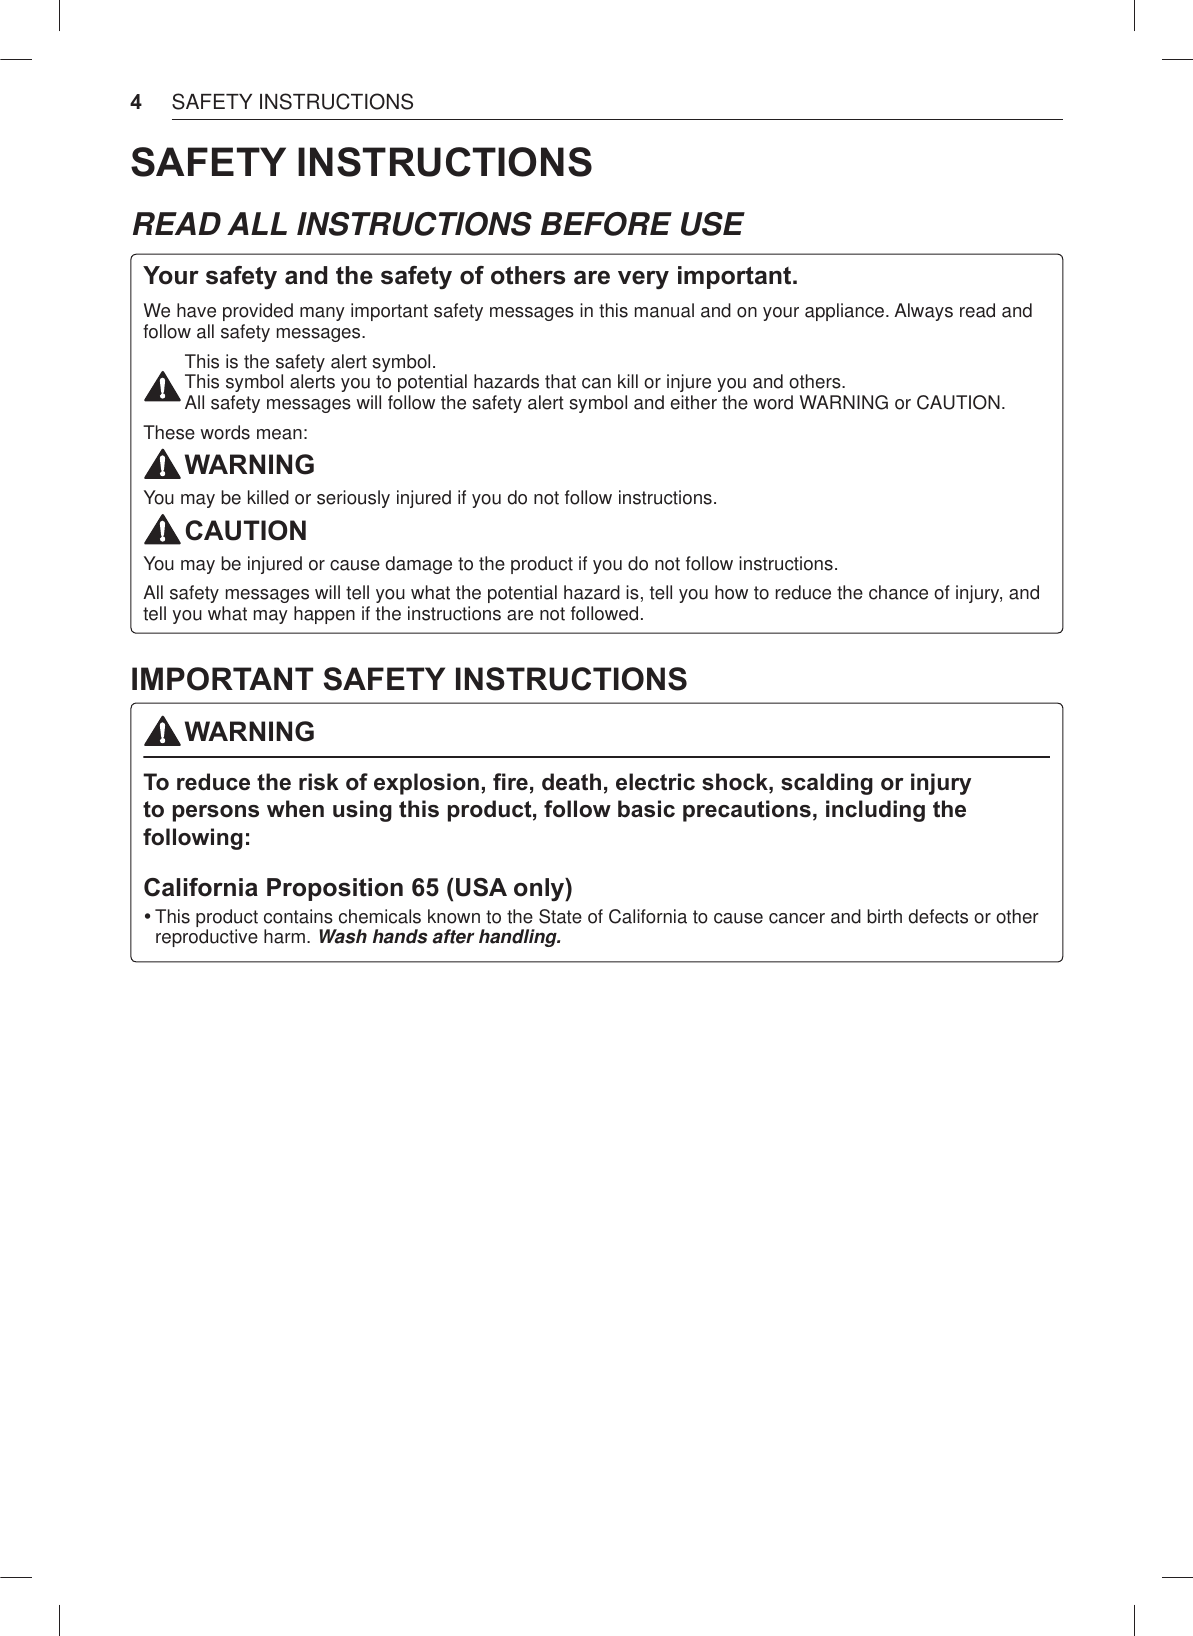 4SAFETY INSTRUCTIONSSAFETY INSTRUCTIONSREAD ALL INSTRUCTIONS BEFORE USEYour safety and the safety of others are very important.We have provided many important safety messages in this manual and on your appliance. Always read and follow all safety messages.This is the safety alert symbol. This symbol alerts you to potential hazards that can kill or injure you and others. All safety messages will follow the safety alert symbol and either the word WARNING or CAUTION.These words mean:WARNINGYou may be killed or seriously injured if you do not follow instructions.CAUTIONYou may be injured or cause damage to the product if you do not follow instructions.All safety messages will tell you what the potential hazard is, tell you how to reduce the chance of injury, and tell you what may happen if the instructions are not followed.IMPORTANT SAFETY INSTRUCTIONSWARNINGTo reduFe the risN of e[pOosion ¿re death eOeFtriF shoFN sFaOdinJ or inMury to persons Zhen usinJ this produFt foOOoZ EasiF preFautions inFOudinJ the foOOoZinJCalifornia Proposition 65 (USA only) %This product contains chemicals known to the State of California to cause cancer and birth defects or otherreproductive harm. Wash hands after handling. 